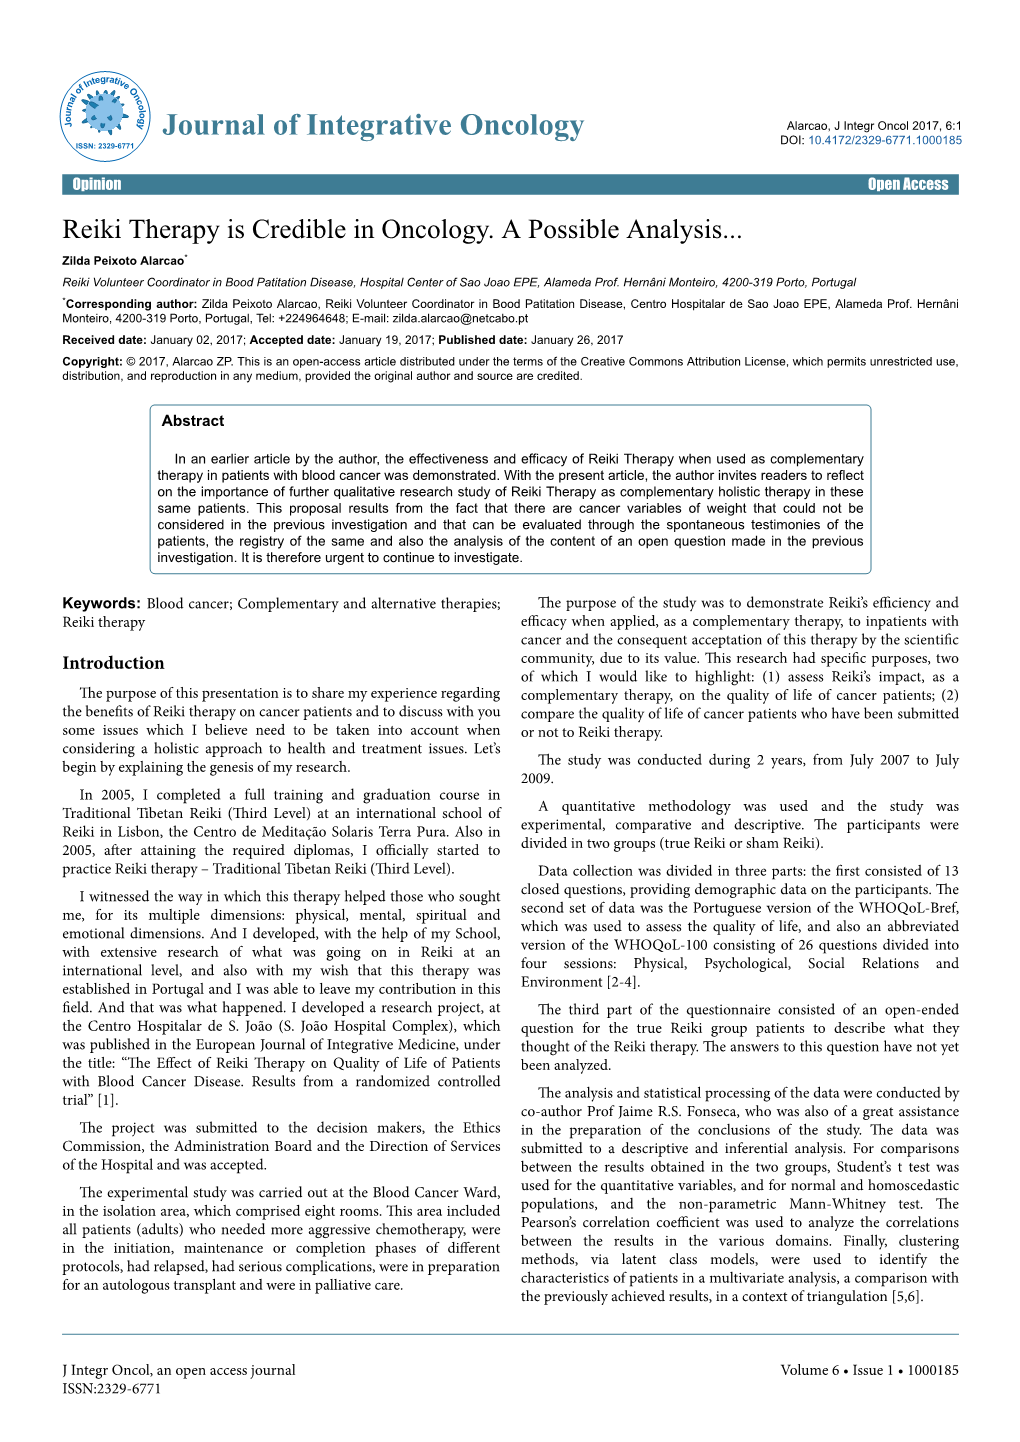 Reiki Therapy Is Credible in Oncology. a Possible Analysis